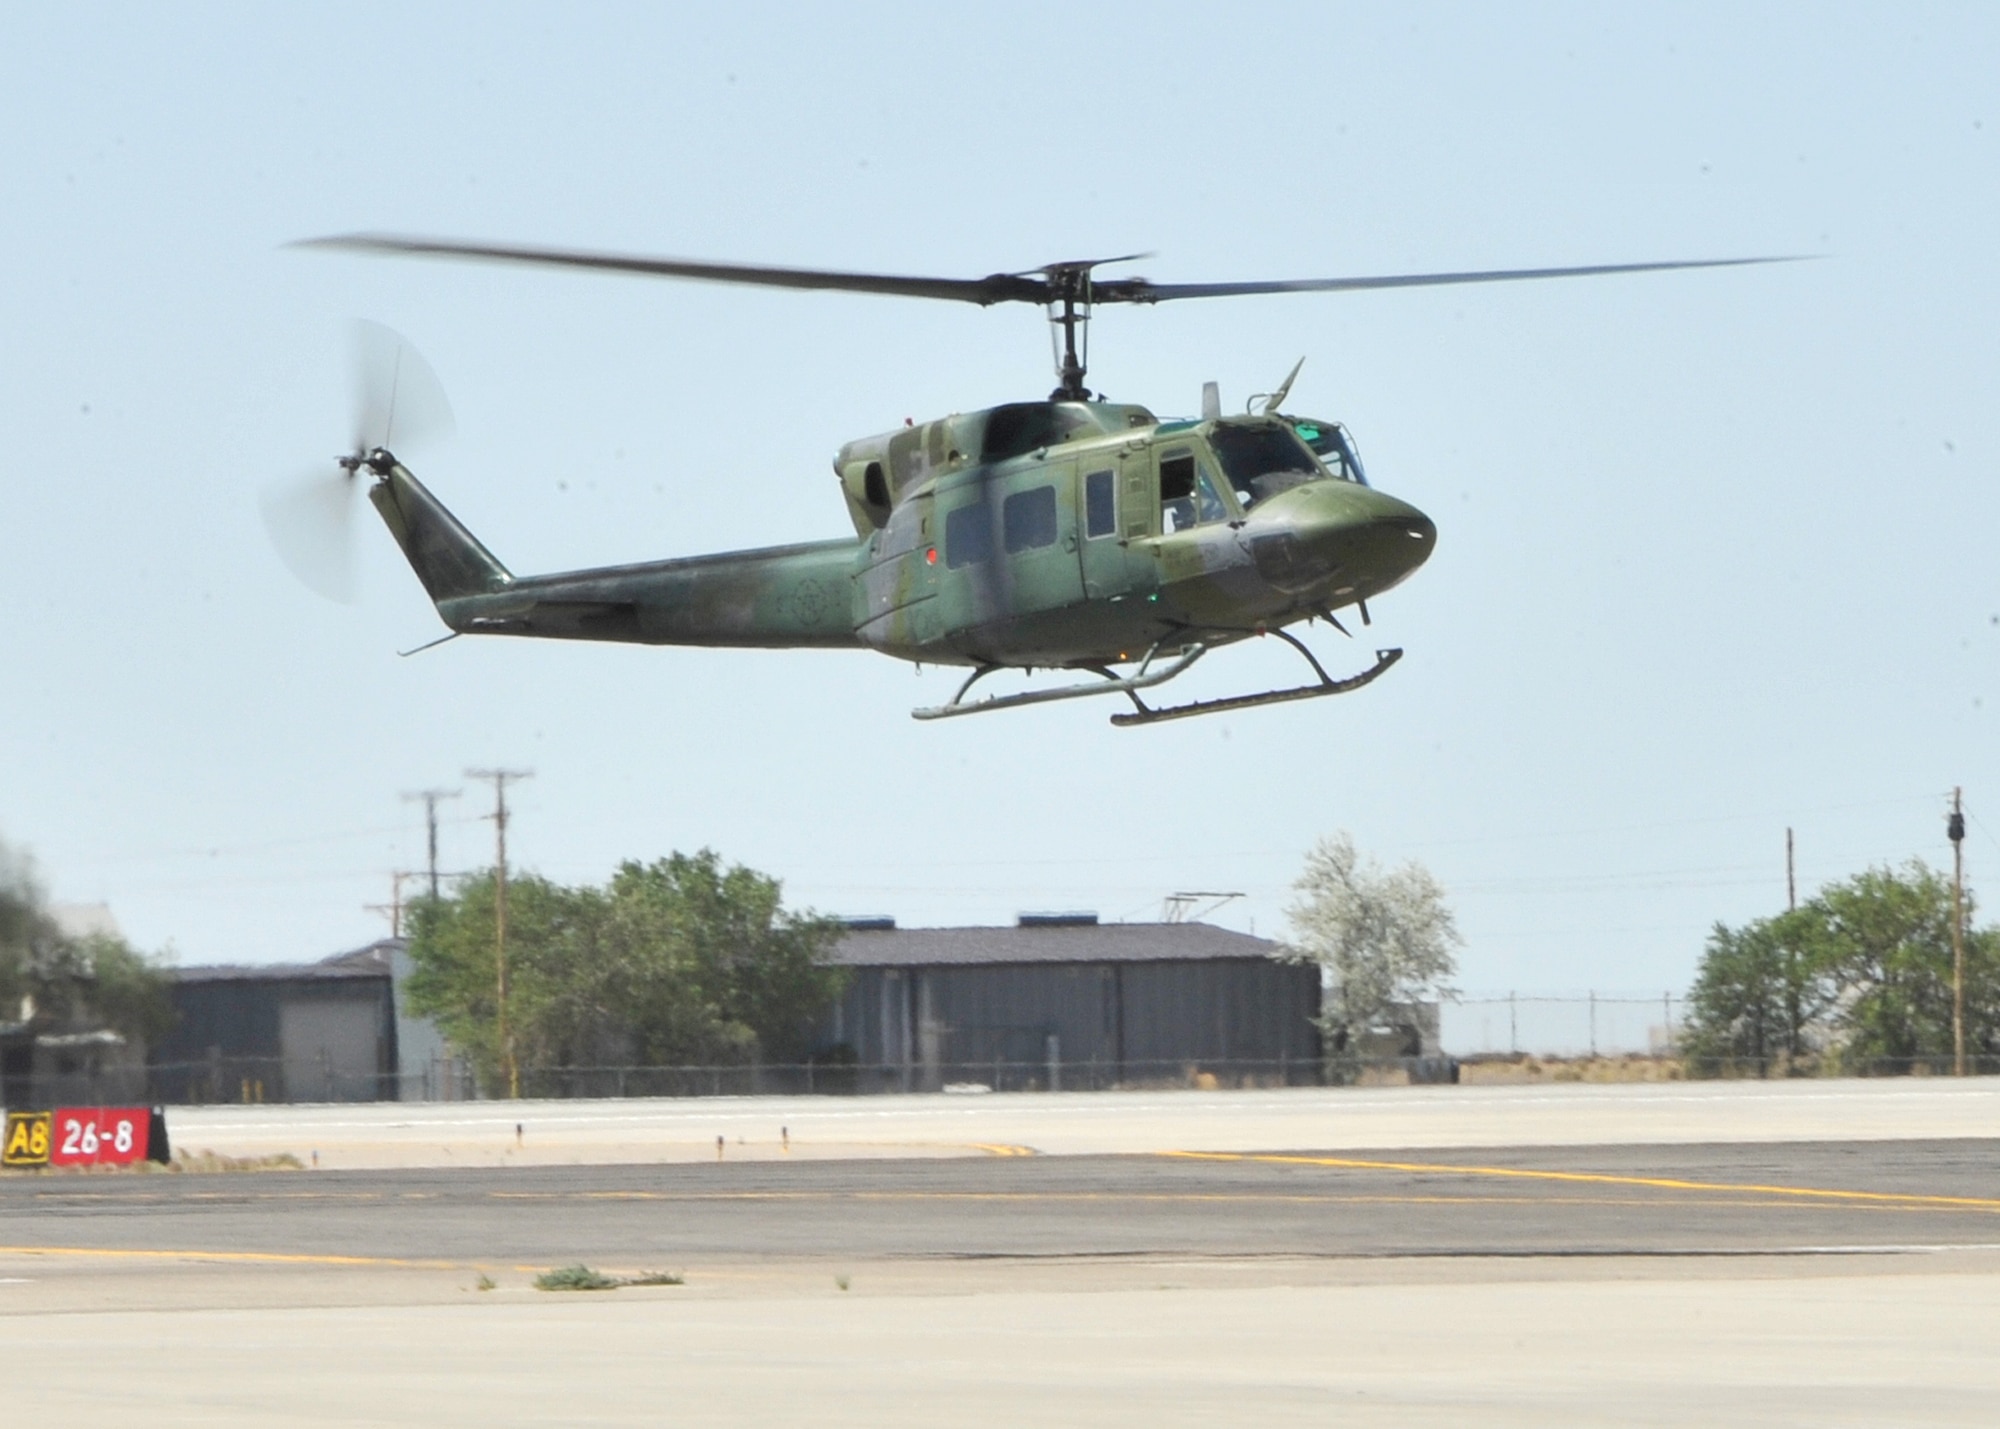 Forty years after UH-1N tail number 69-6650 was delivered to the Air Force, the helicopter recently logged its 15,000th flight hour.